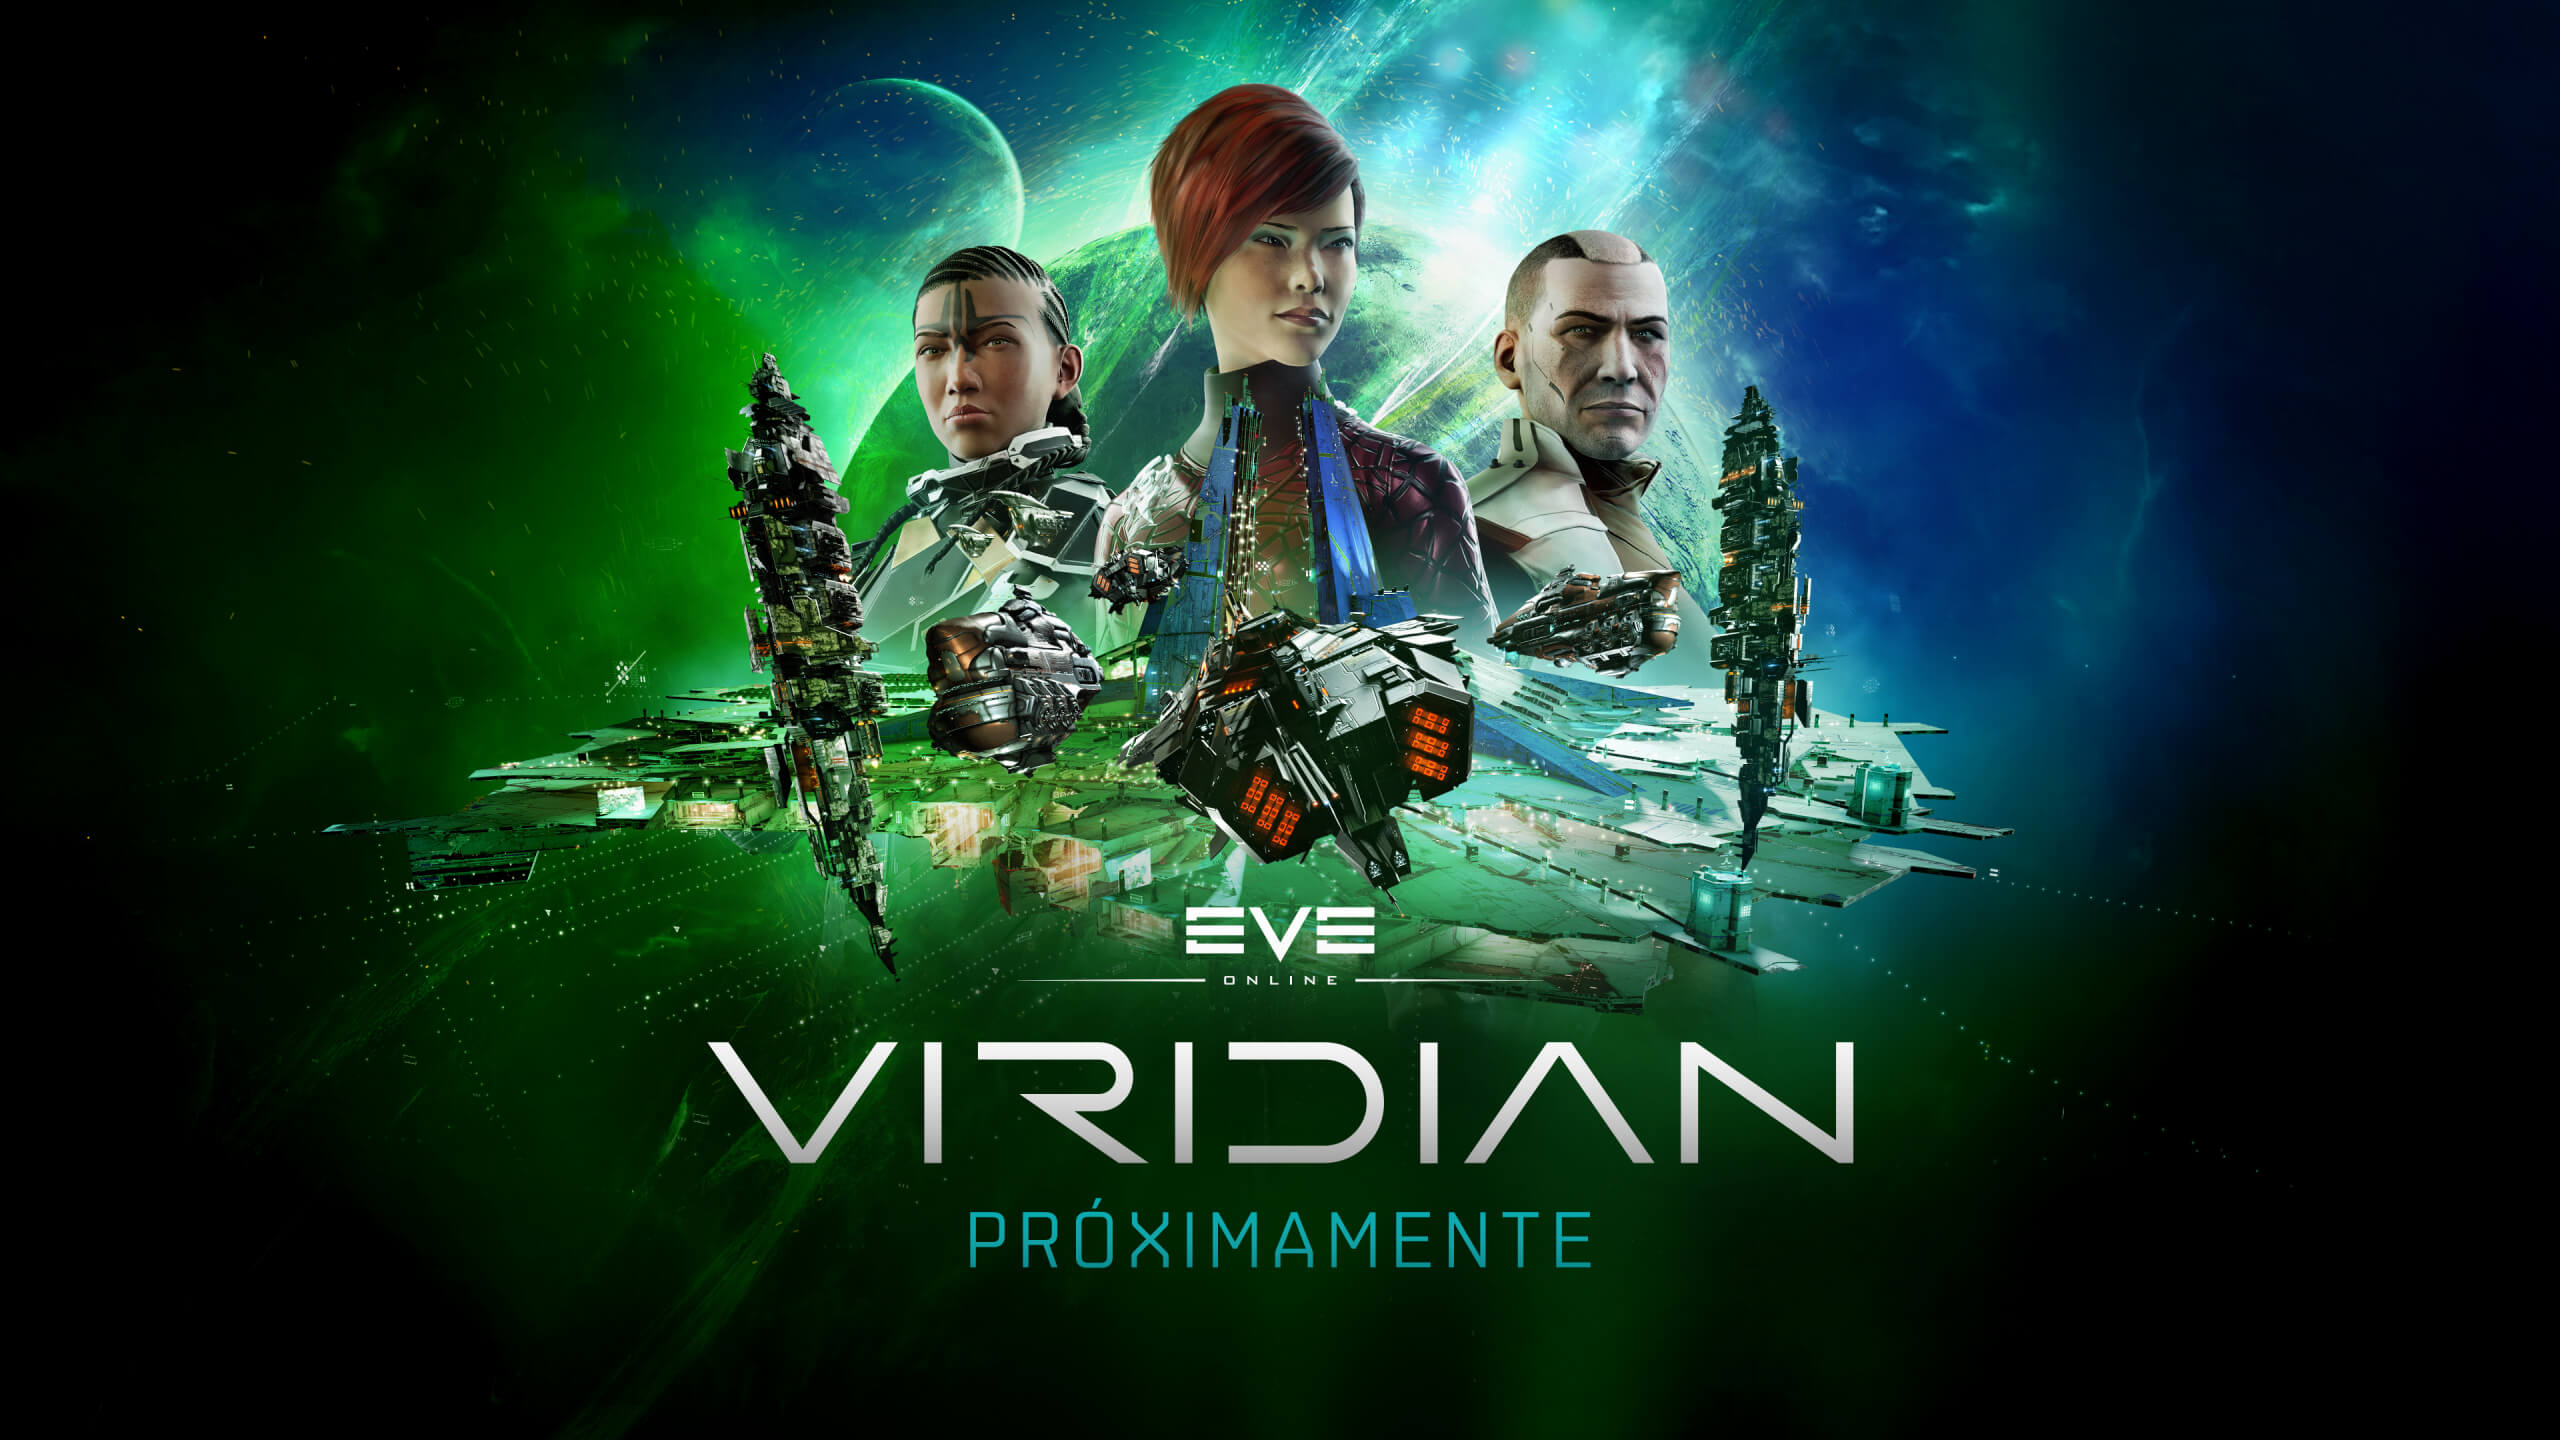 CCP Games announces 20 years of EVE Online with the new expansion "Viridian", which will be launched in June 2023